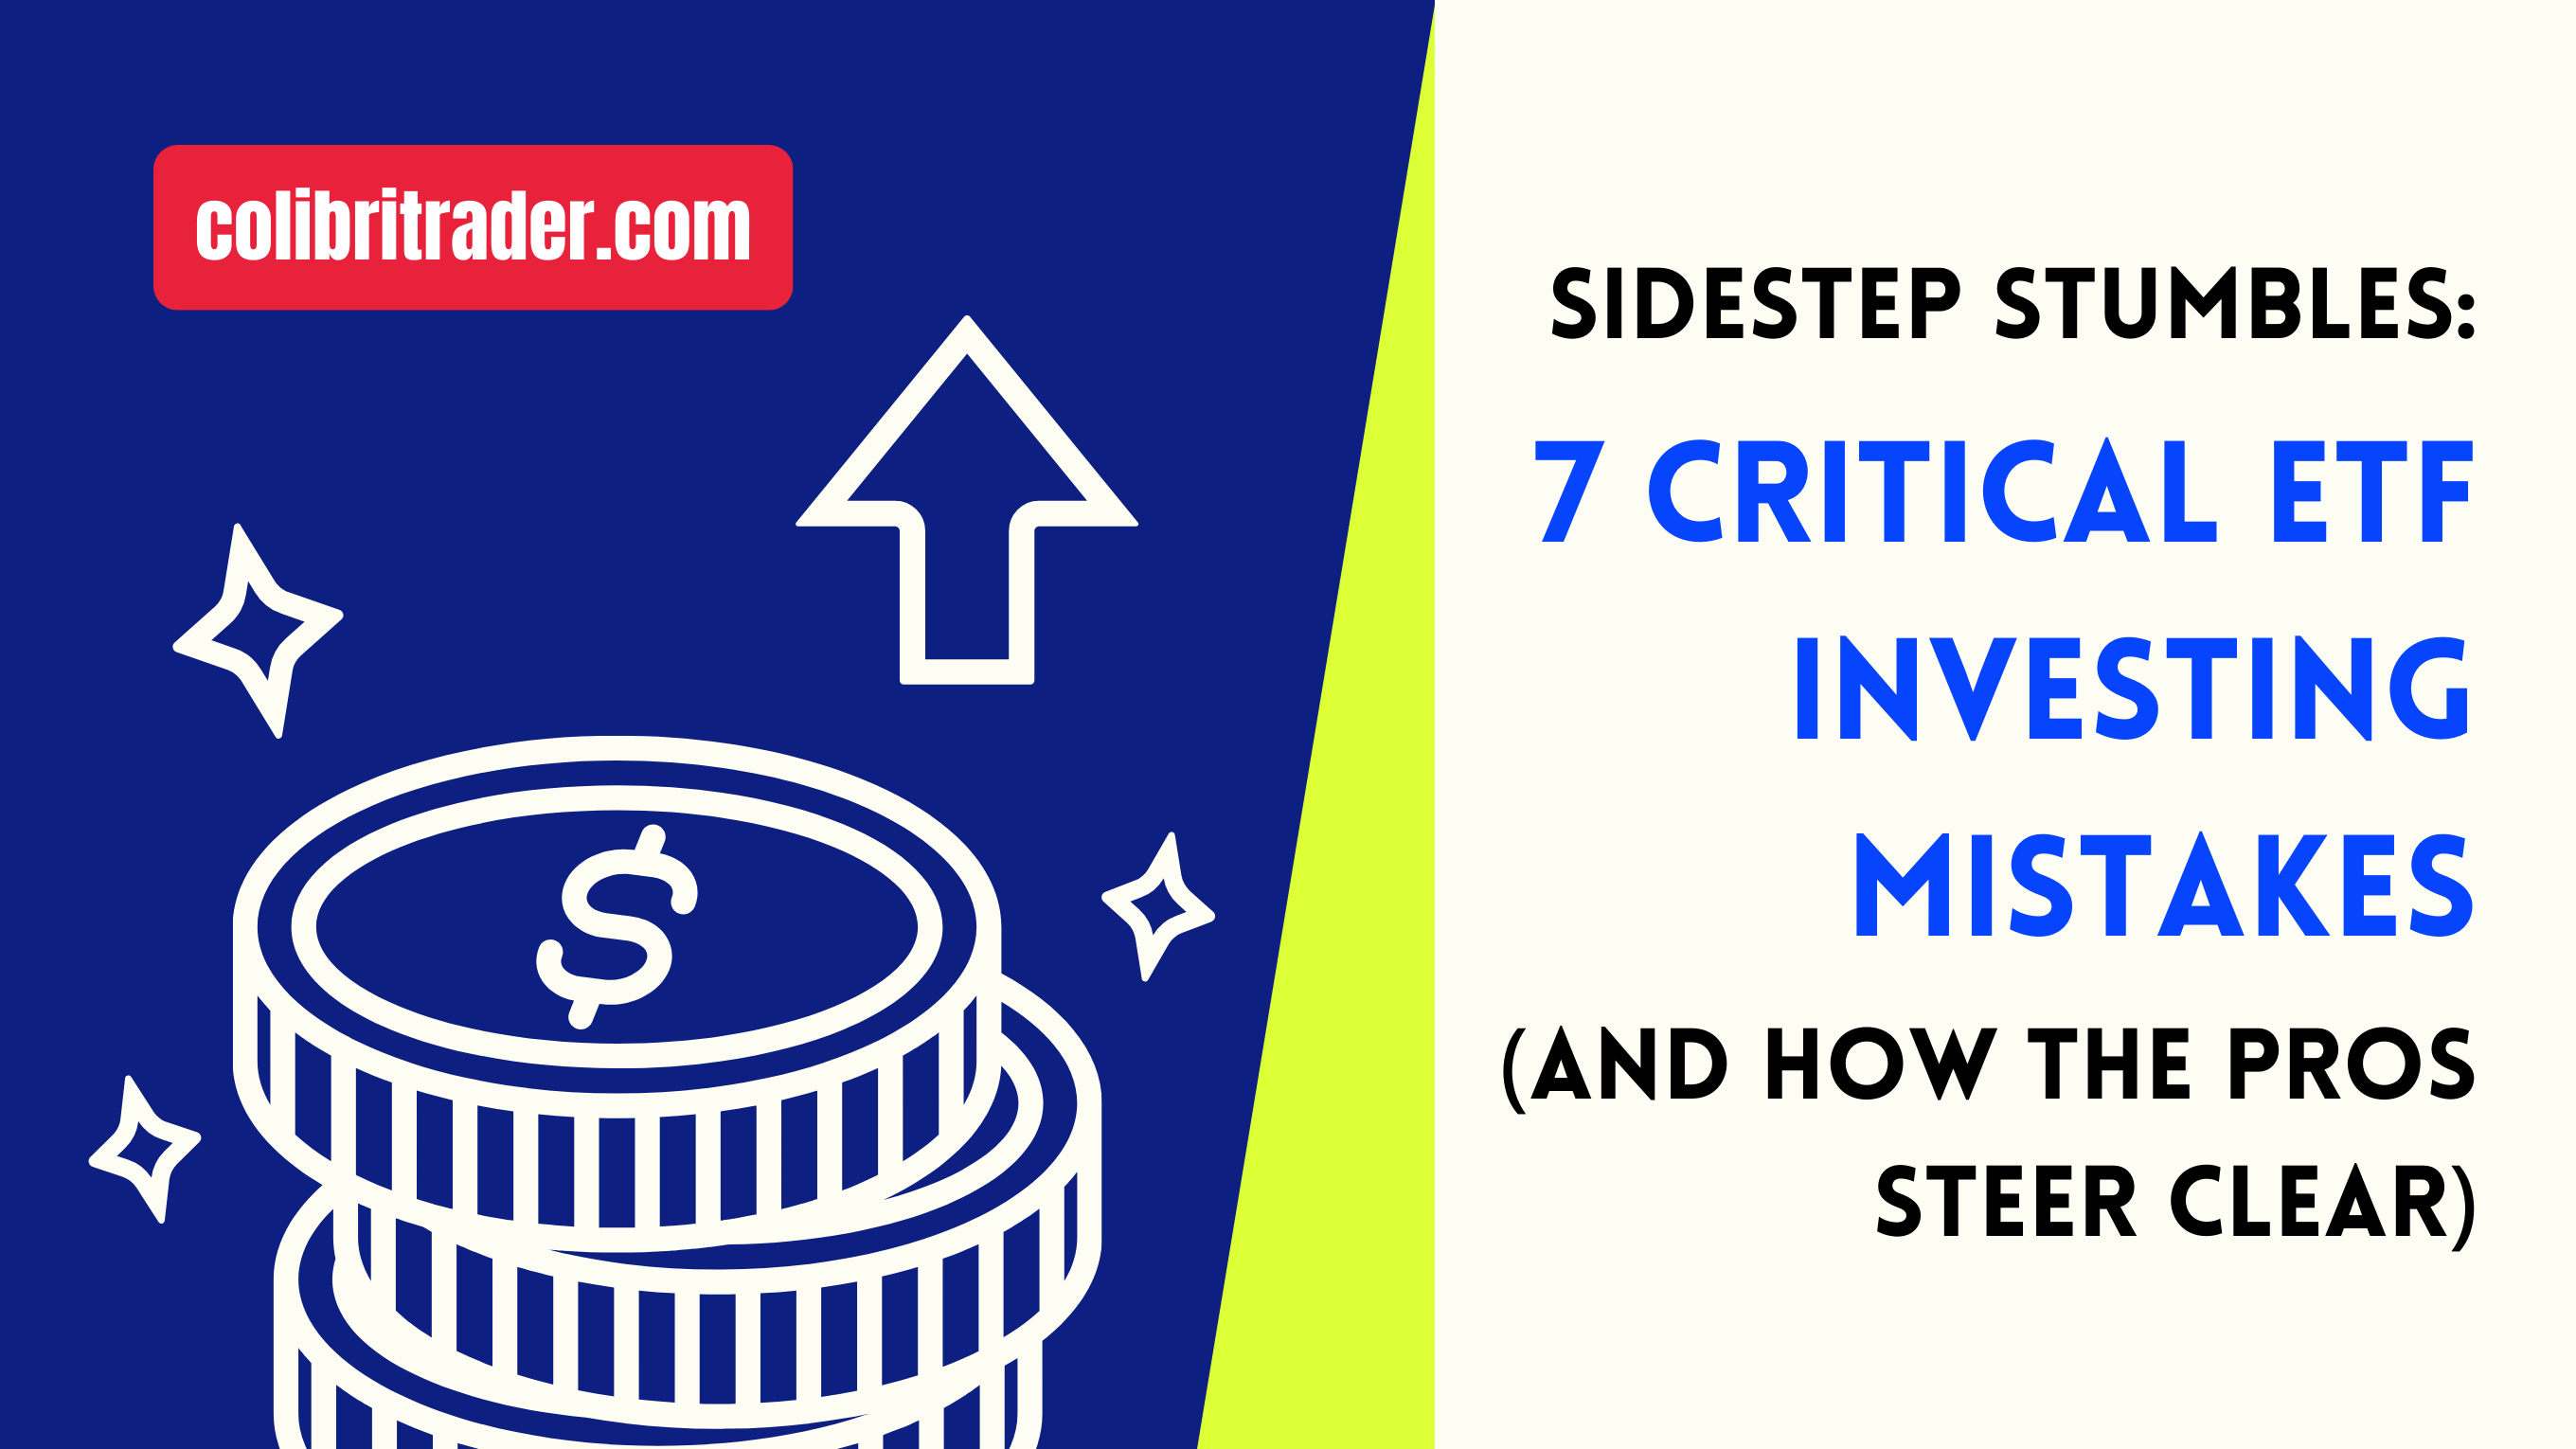 Sidestep Stumbles: 7 Critical ETF Investing Mistakes (and How the Pros Steer Clear)